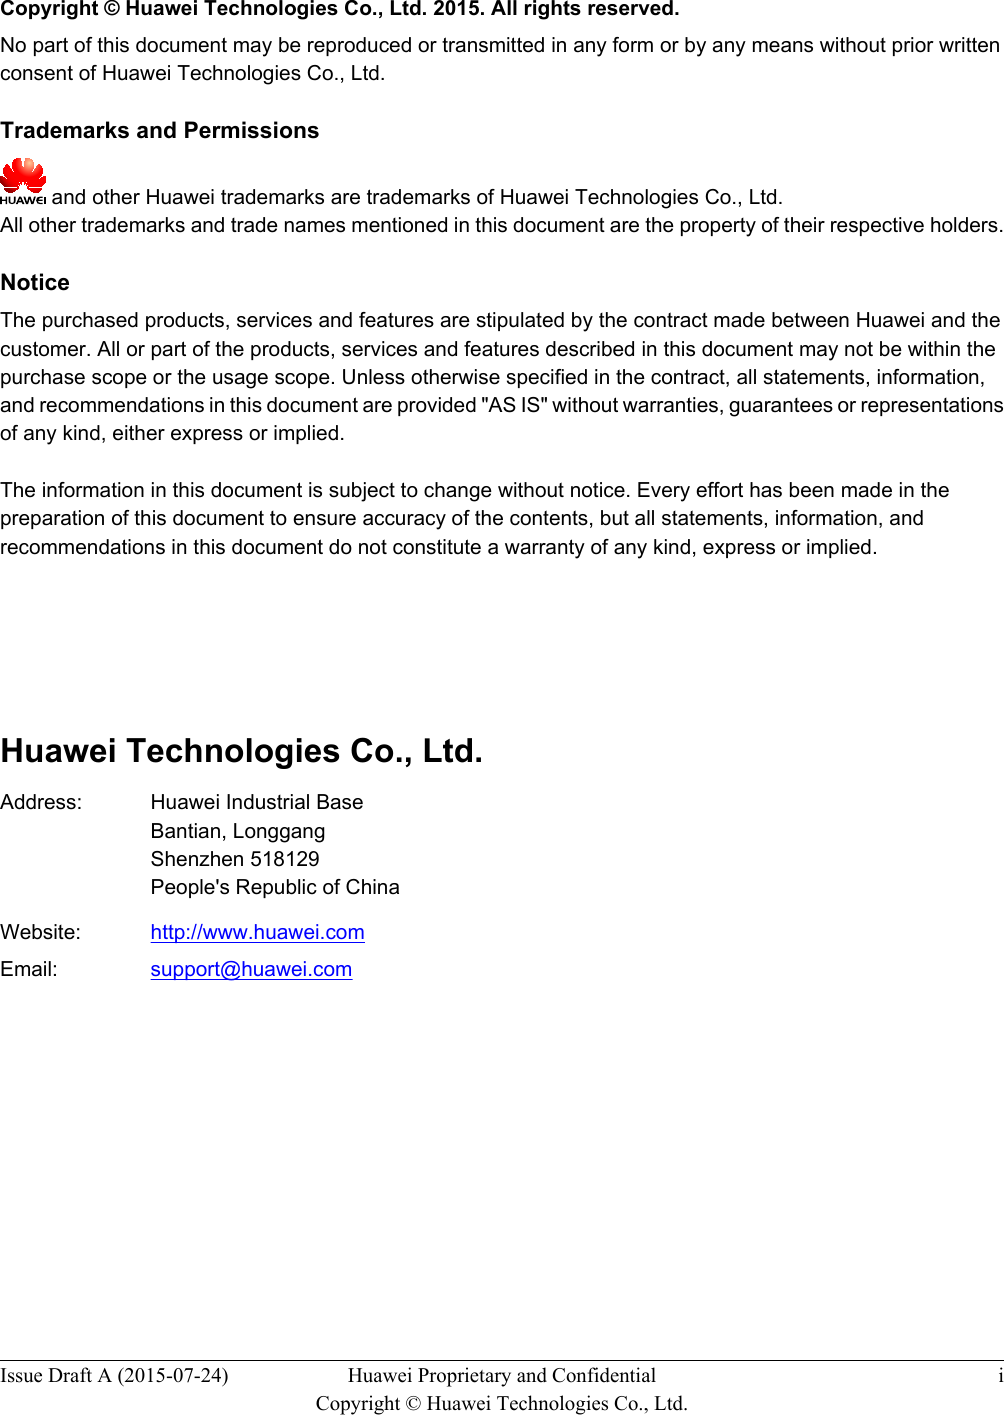   Copyright © Huawei Technologies Co., Ltd. 2015. All rights reserved.No part of this document may be reproduced or transmitted in any form or by any means without prior writtenconsent of Huawei Technologies Co., Ltd. Trademarks and Permissions and other Huawei trademarks are trademarks of Huawei Technologies Co., Ltd.All other trademarks and trade names mentioned in this document are the property of their respective holders. NoticeThe purchased products, services and features are stipulated by the contract made between Huawei and thecustomer. All or part of the products, services and features described in this document may not be within thepurchase scope or the usage scope. Unless otherwise specified in the contract, all statements, information,and recommendations in this document are provided &quot;AS IS&quot; without warranties, guarantees or representationsof any kind, either express or implied.The information in this document is subject to change without notice. Every effort has been made in thepreparation of this document to ensure accuracy of the contents, but all statements, information, andrecommendations in this document do not constitute a warranty of any kind, express or implied.       Huawei Technologies Co., Ltd.Address: Huawei Industrial BaseBantian, LonggangShenzhen 518129People&apos;s Republic of ChinaWebsite: http://www.huawei.comEmail: support@huawei.comIssue Draft A (2015-07-24) Huawei Proprietary and ConfidentialCopyright © Huawei Technologies Co., Ltd.i